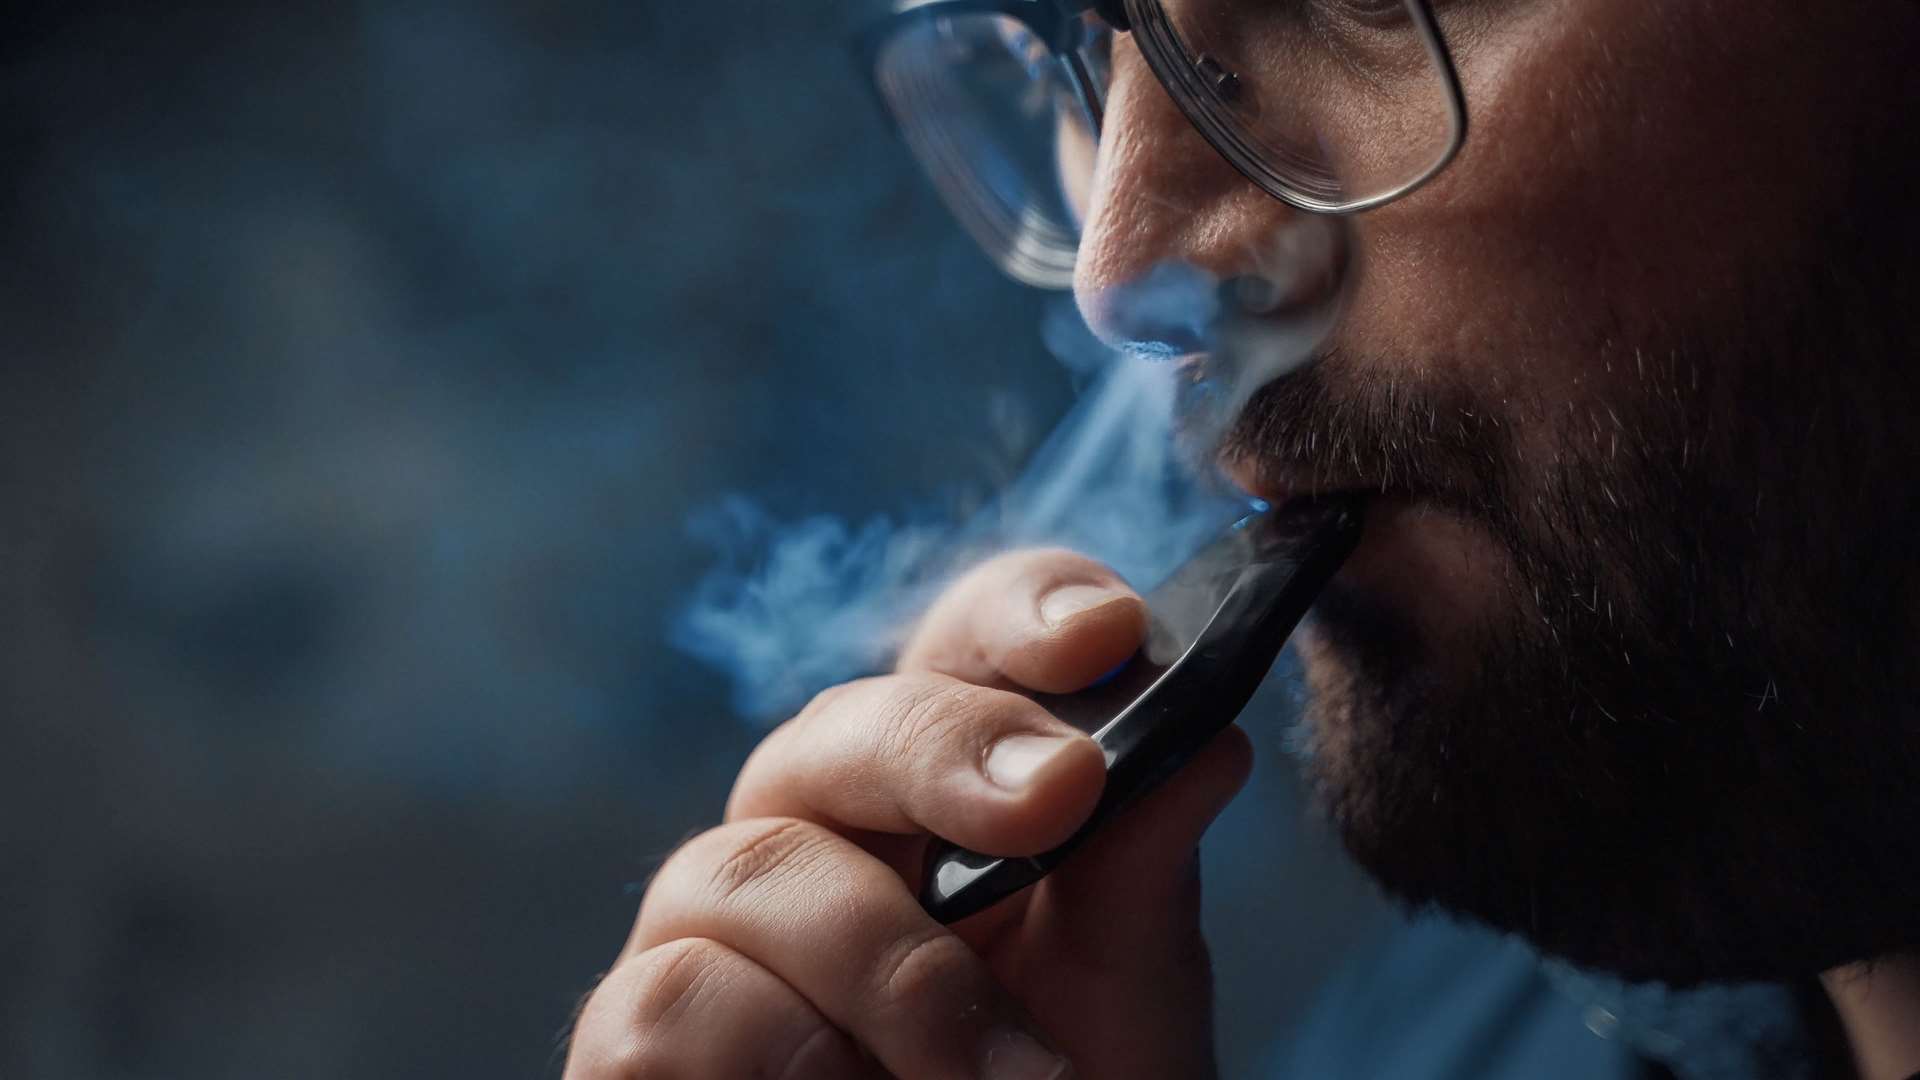 Trading Standards officers have appealed for help in stamping out illegal vape sales, as well as sales of illegal vape products.